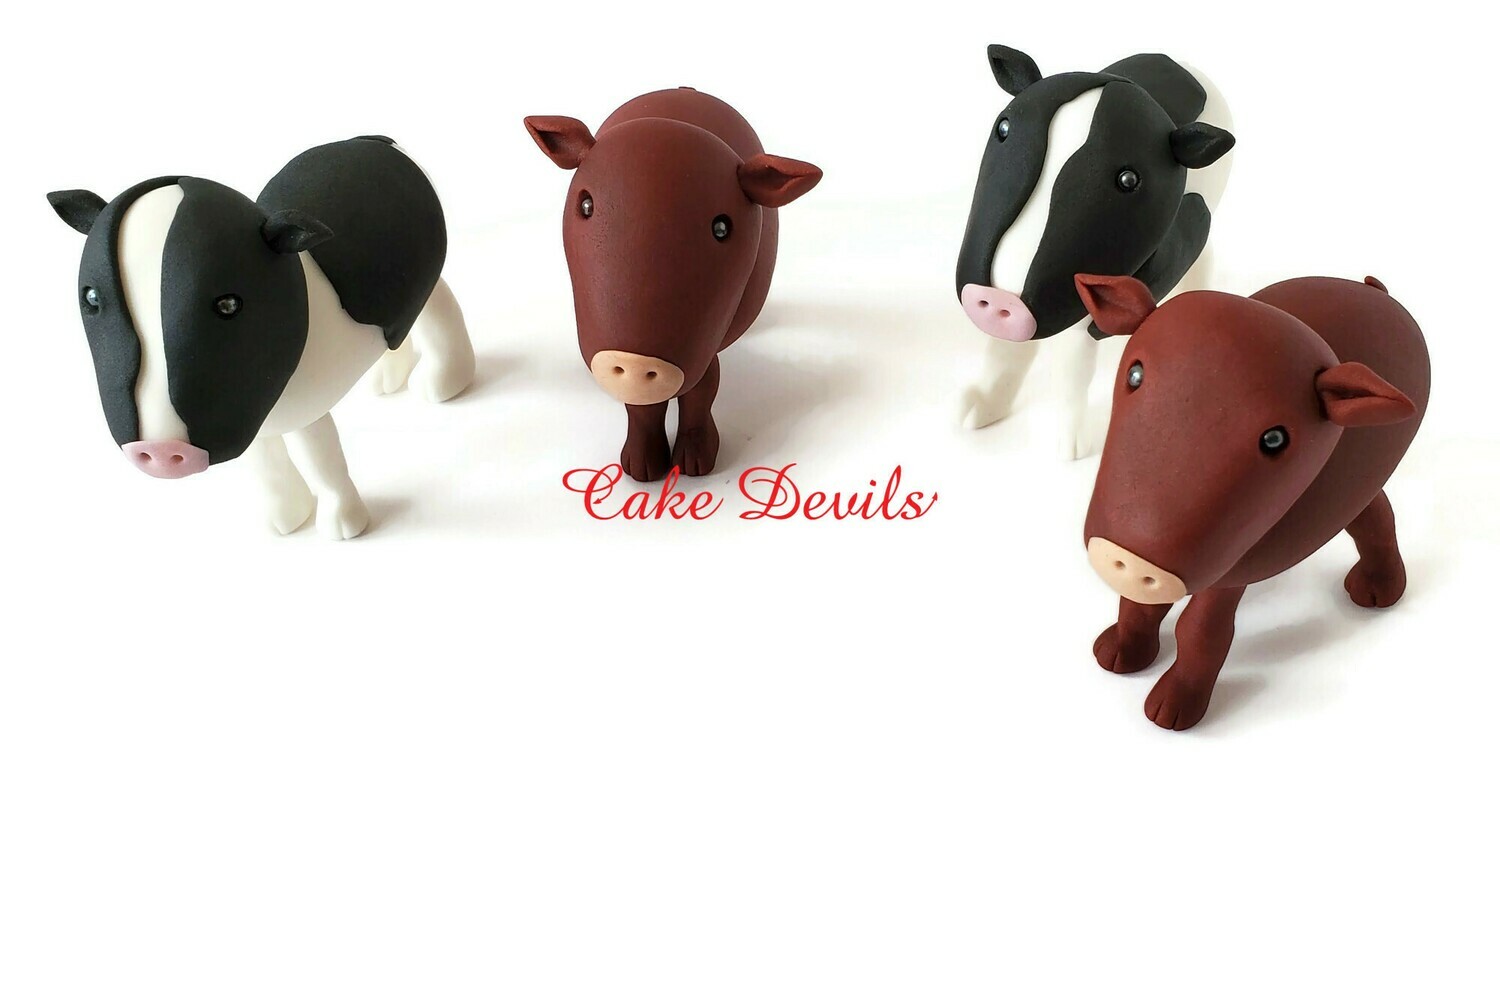 Fondant Cow Cake Toppers, Handmade Cows and fondant Cow Spots Cake Decorations for Farm or Barn Cake